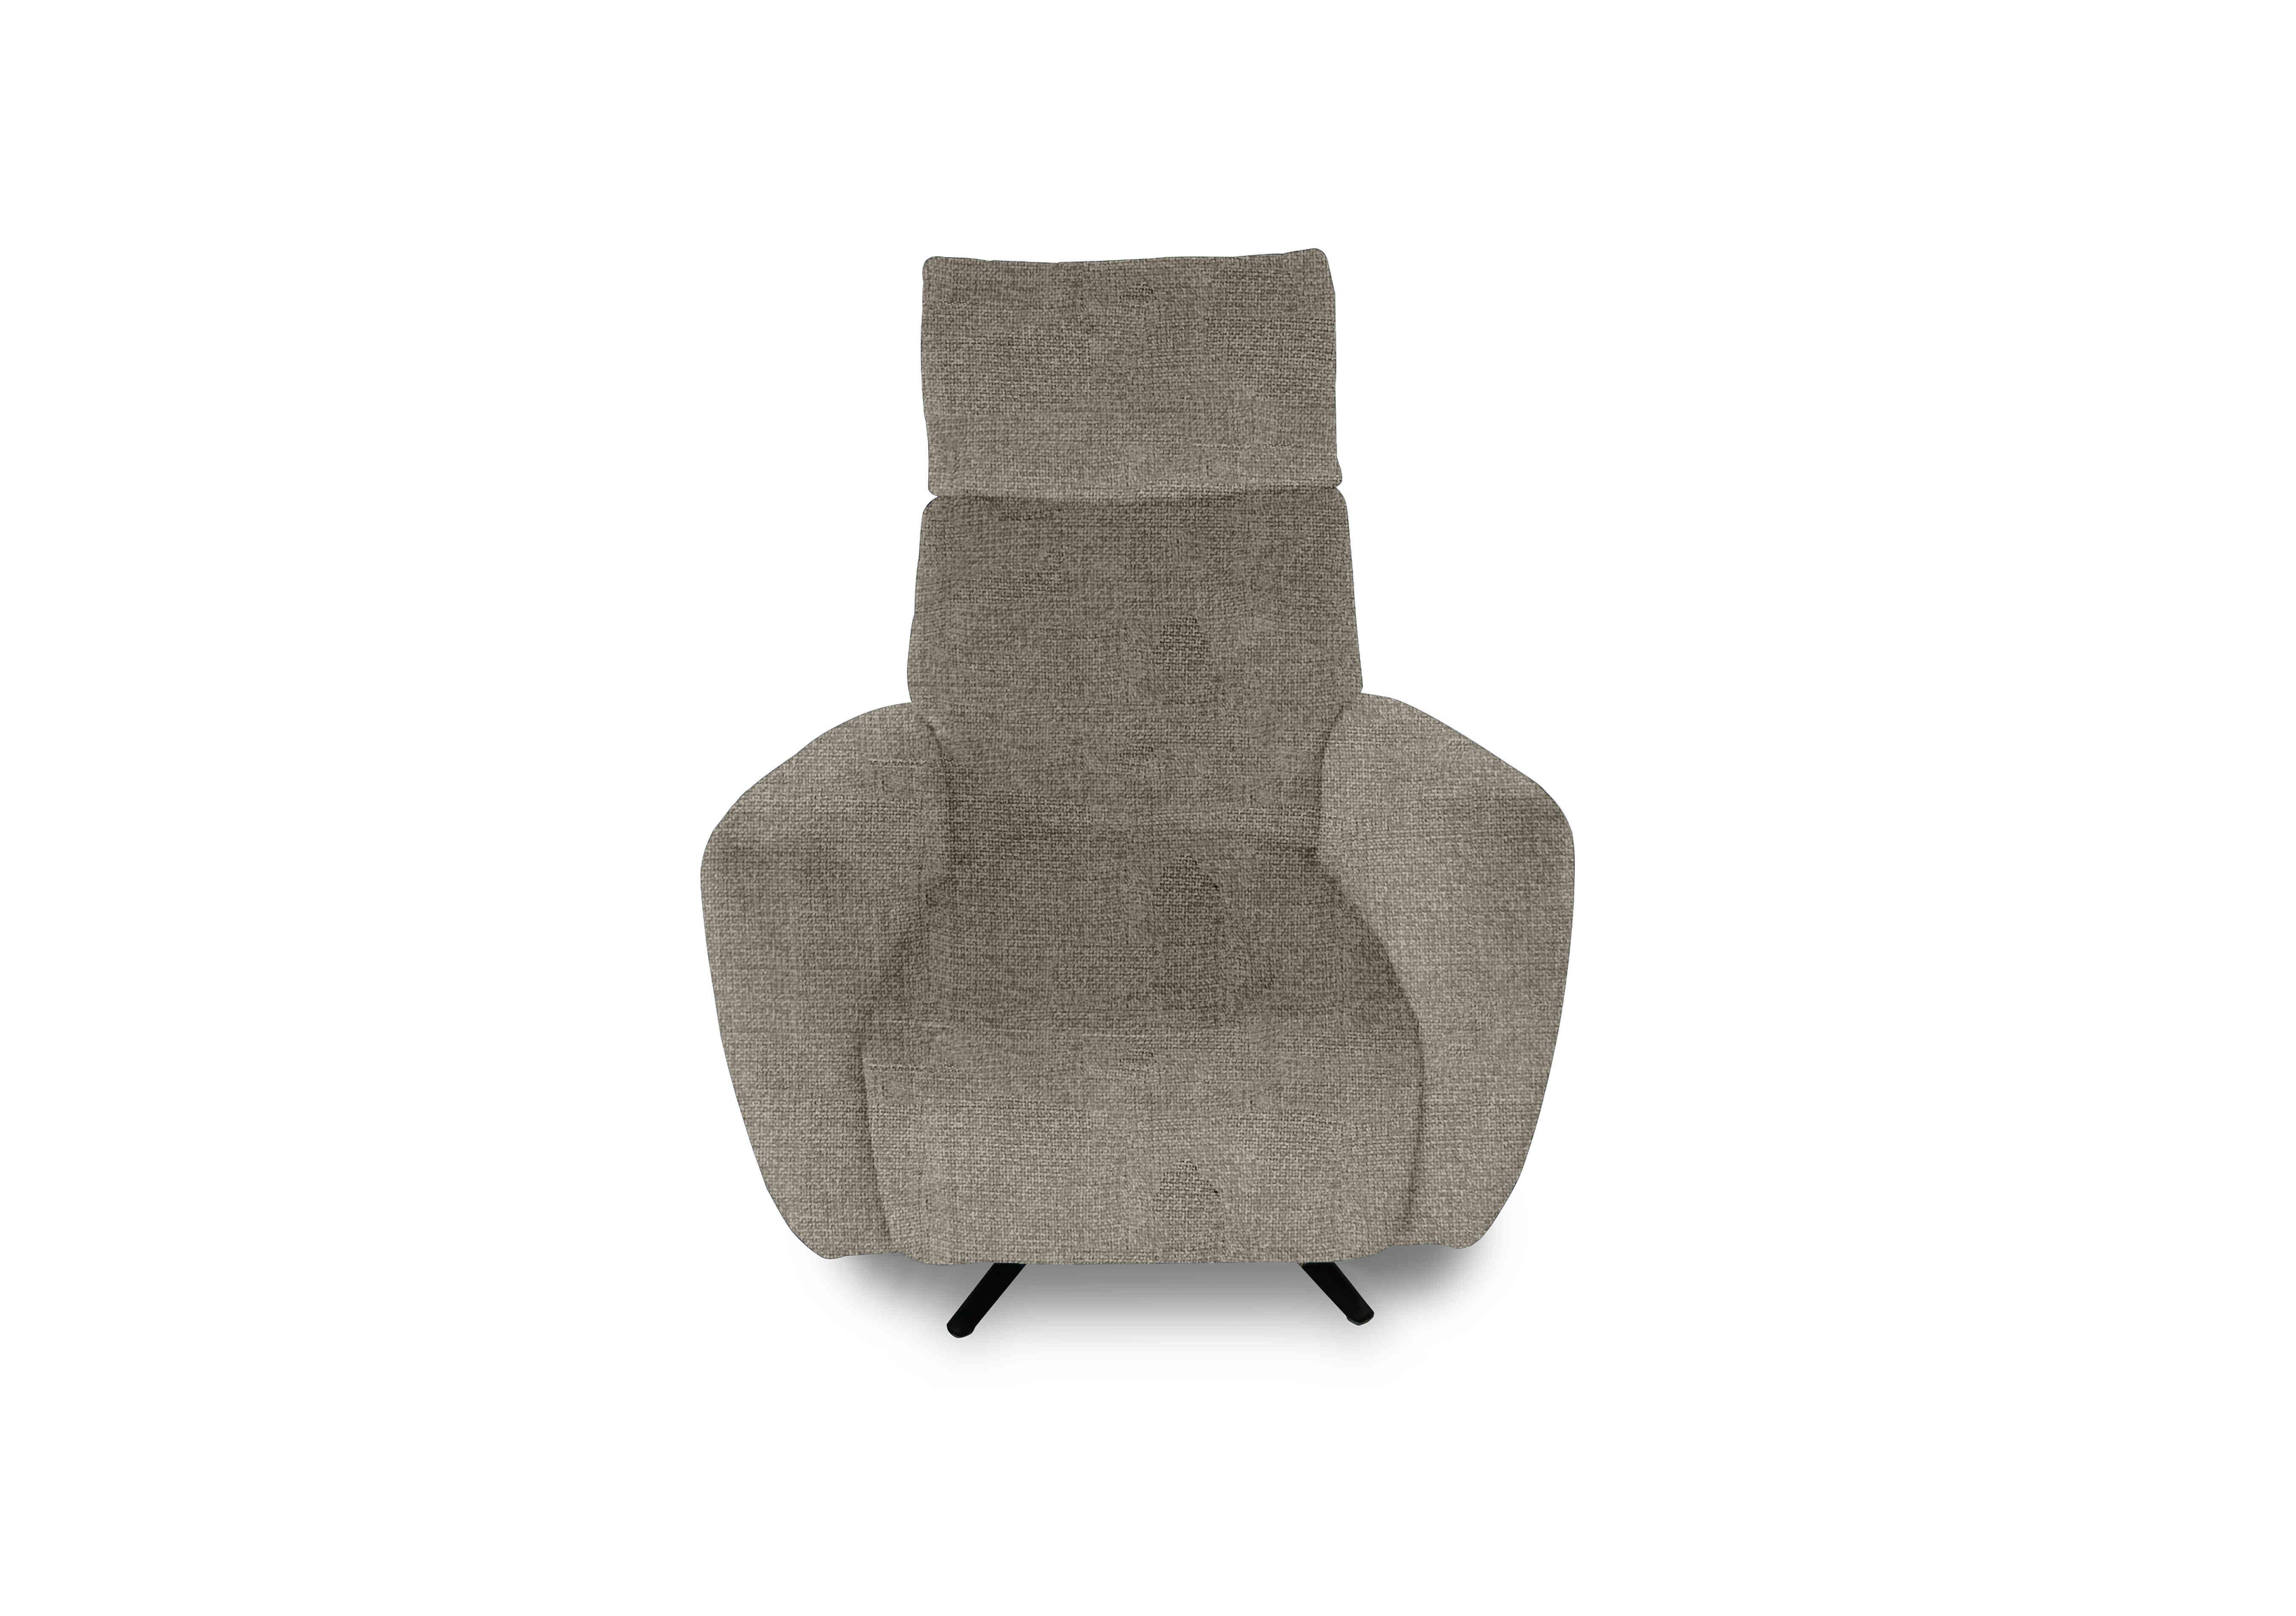 Designer Chair Collection Granada Fabric Power Recliner Swivel Chair with Massage Feature in Fab-Cac-R120 Sand on Furniture Village